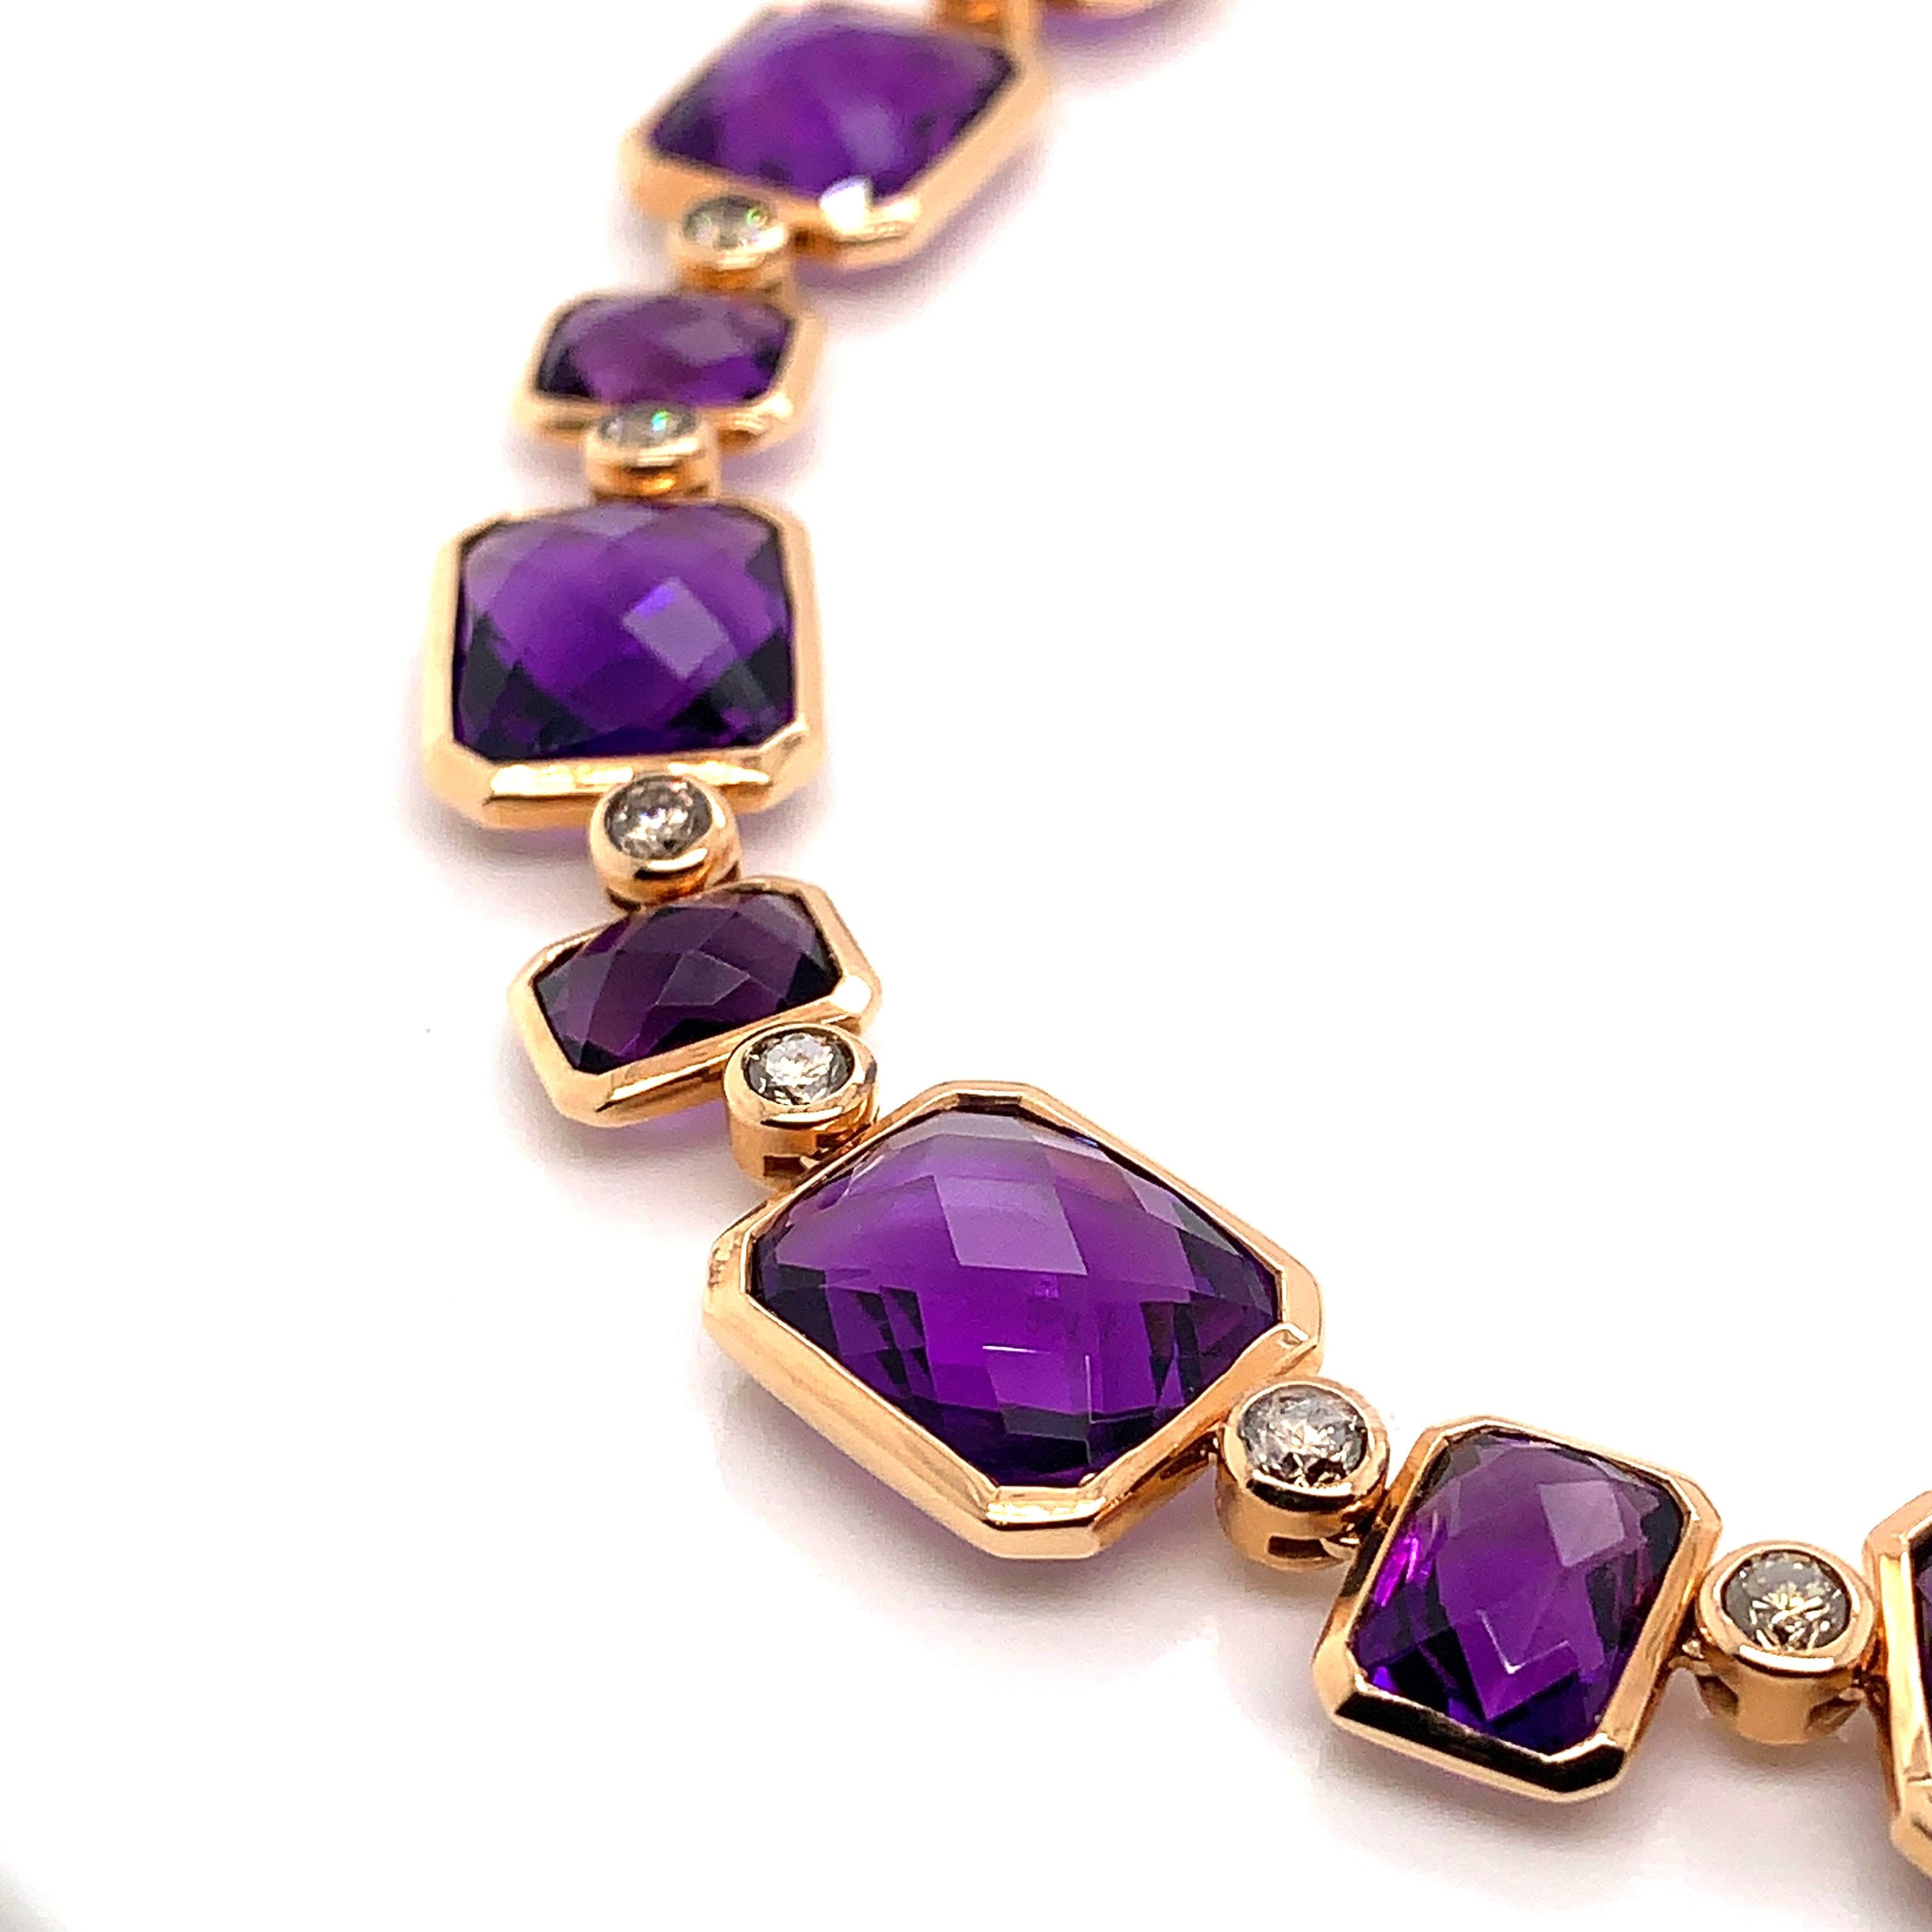 Contemporary 87.12 Carat Amethyst Necklace in 18 Karat Rose Gold with Diamonds For Sale